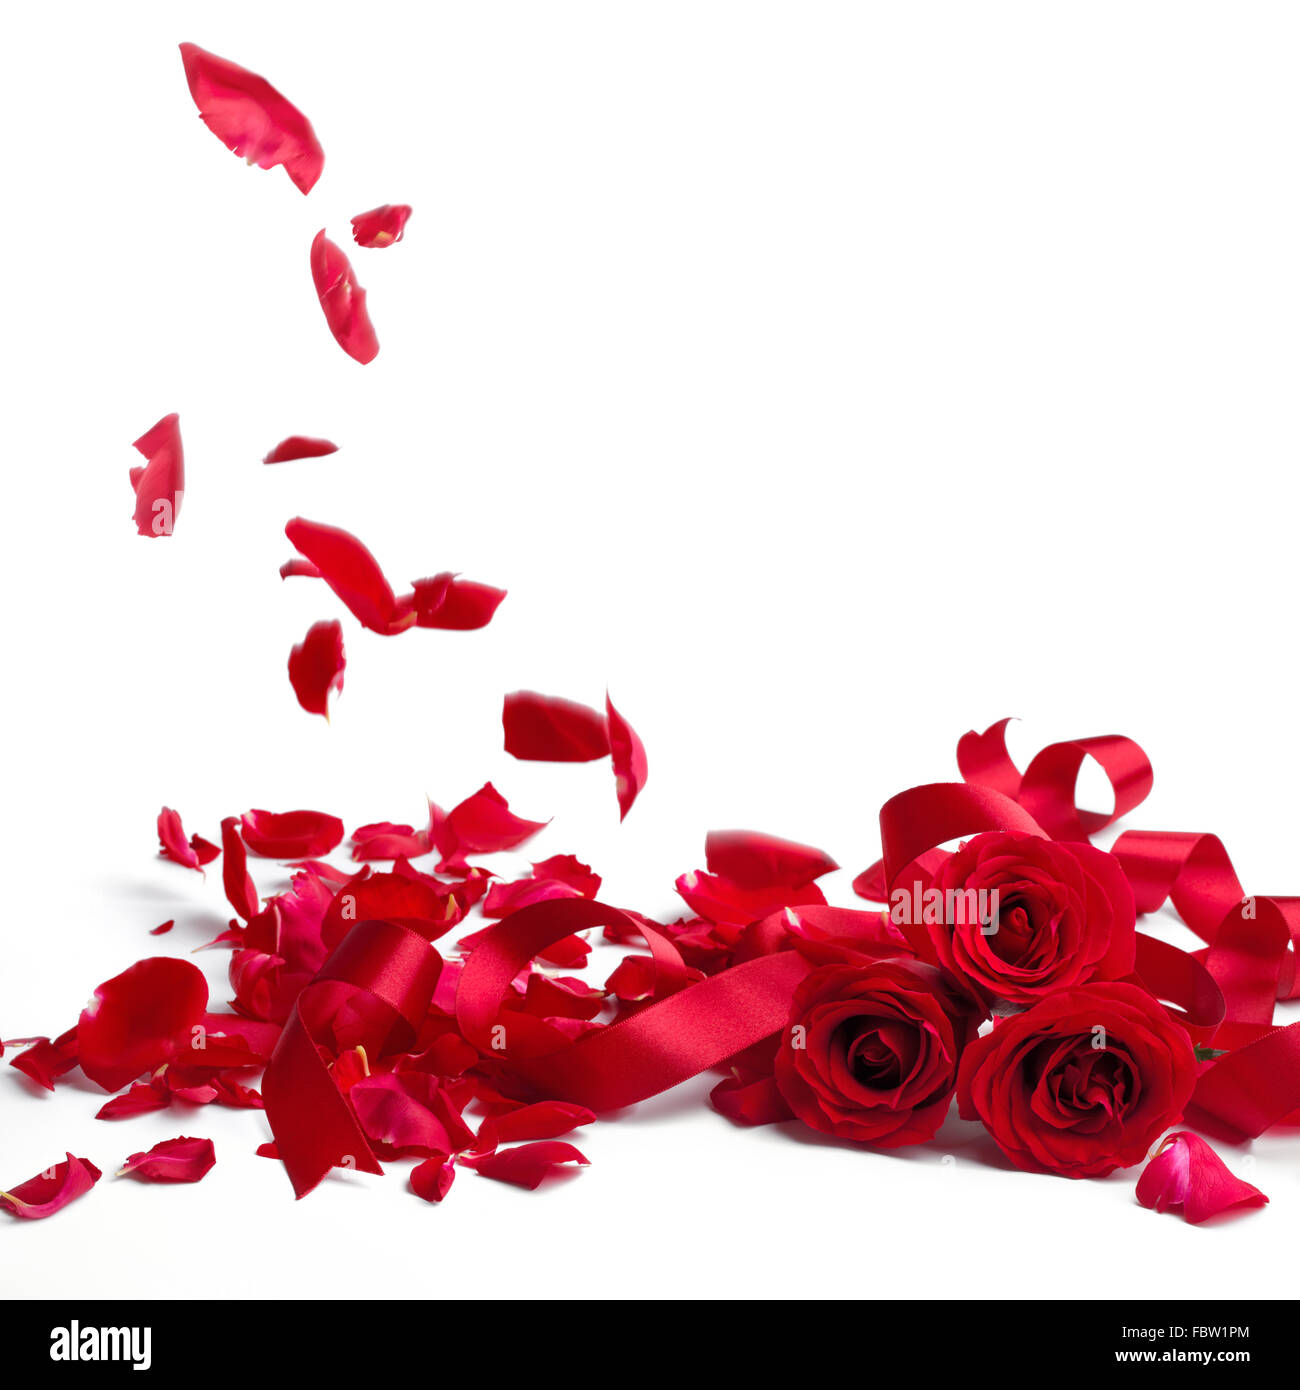 Red roses and rose petals on white background,Valentines day concept. Stock Photo